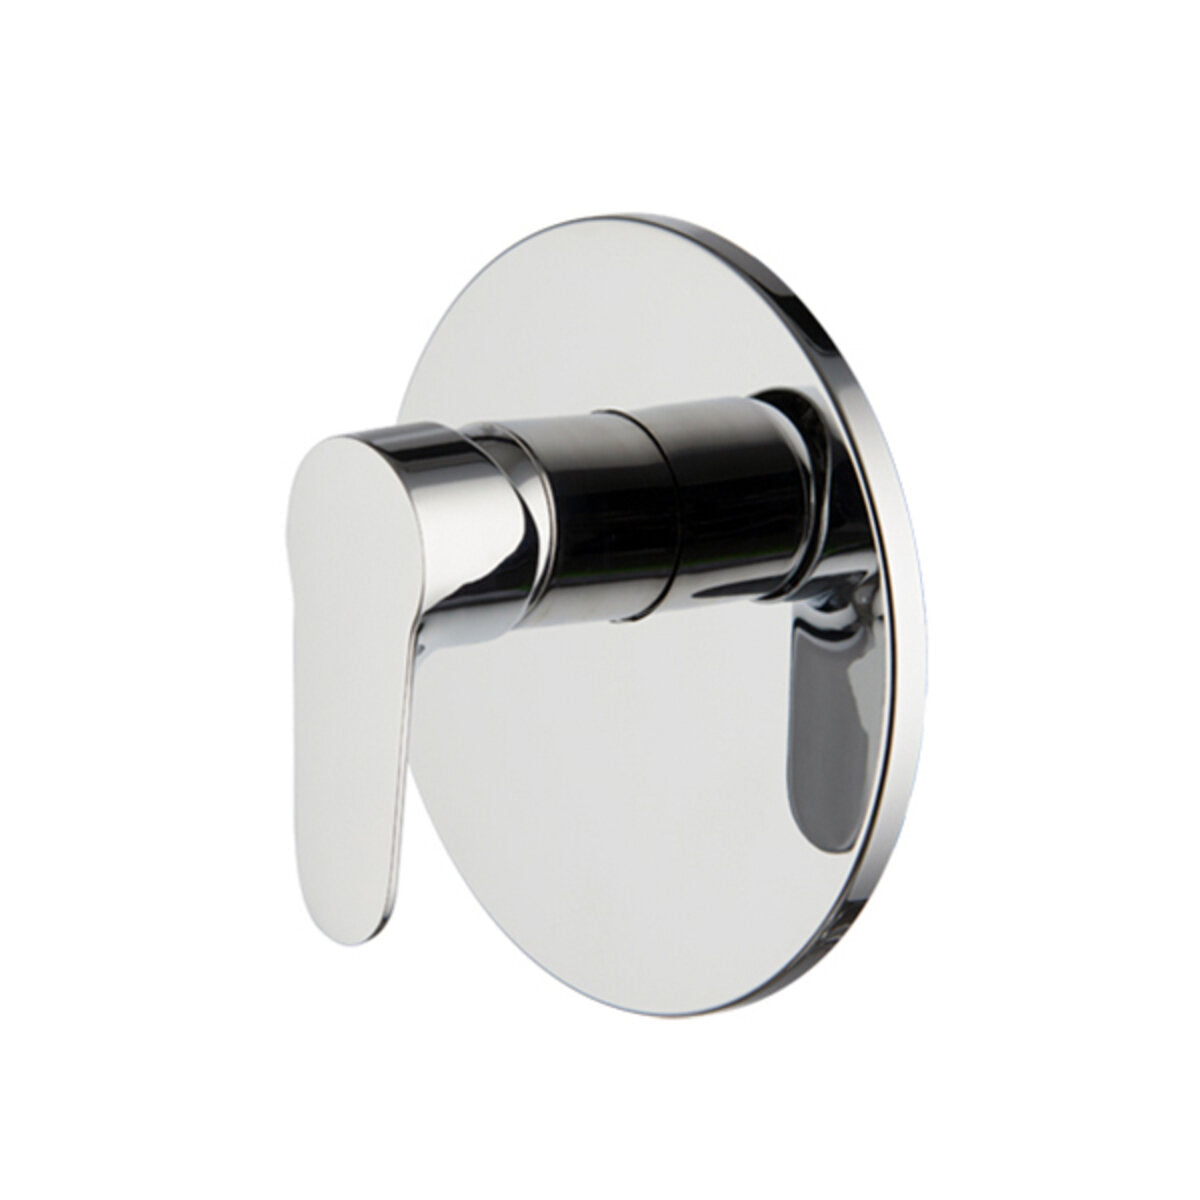 Fima Carlo Frattini series 22 built-in shower mixer complete with built-in body